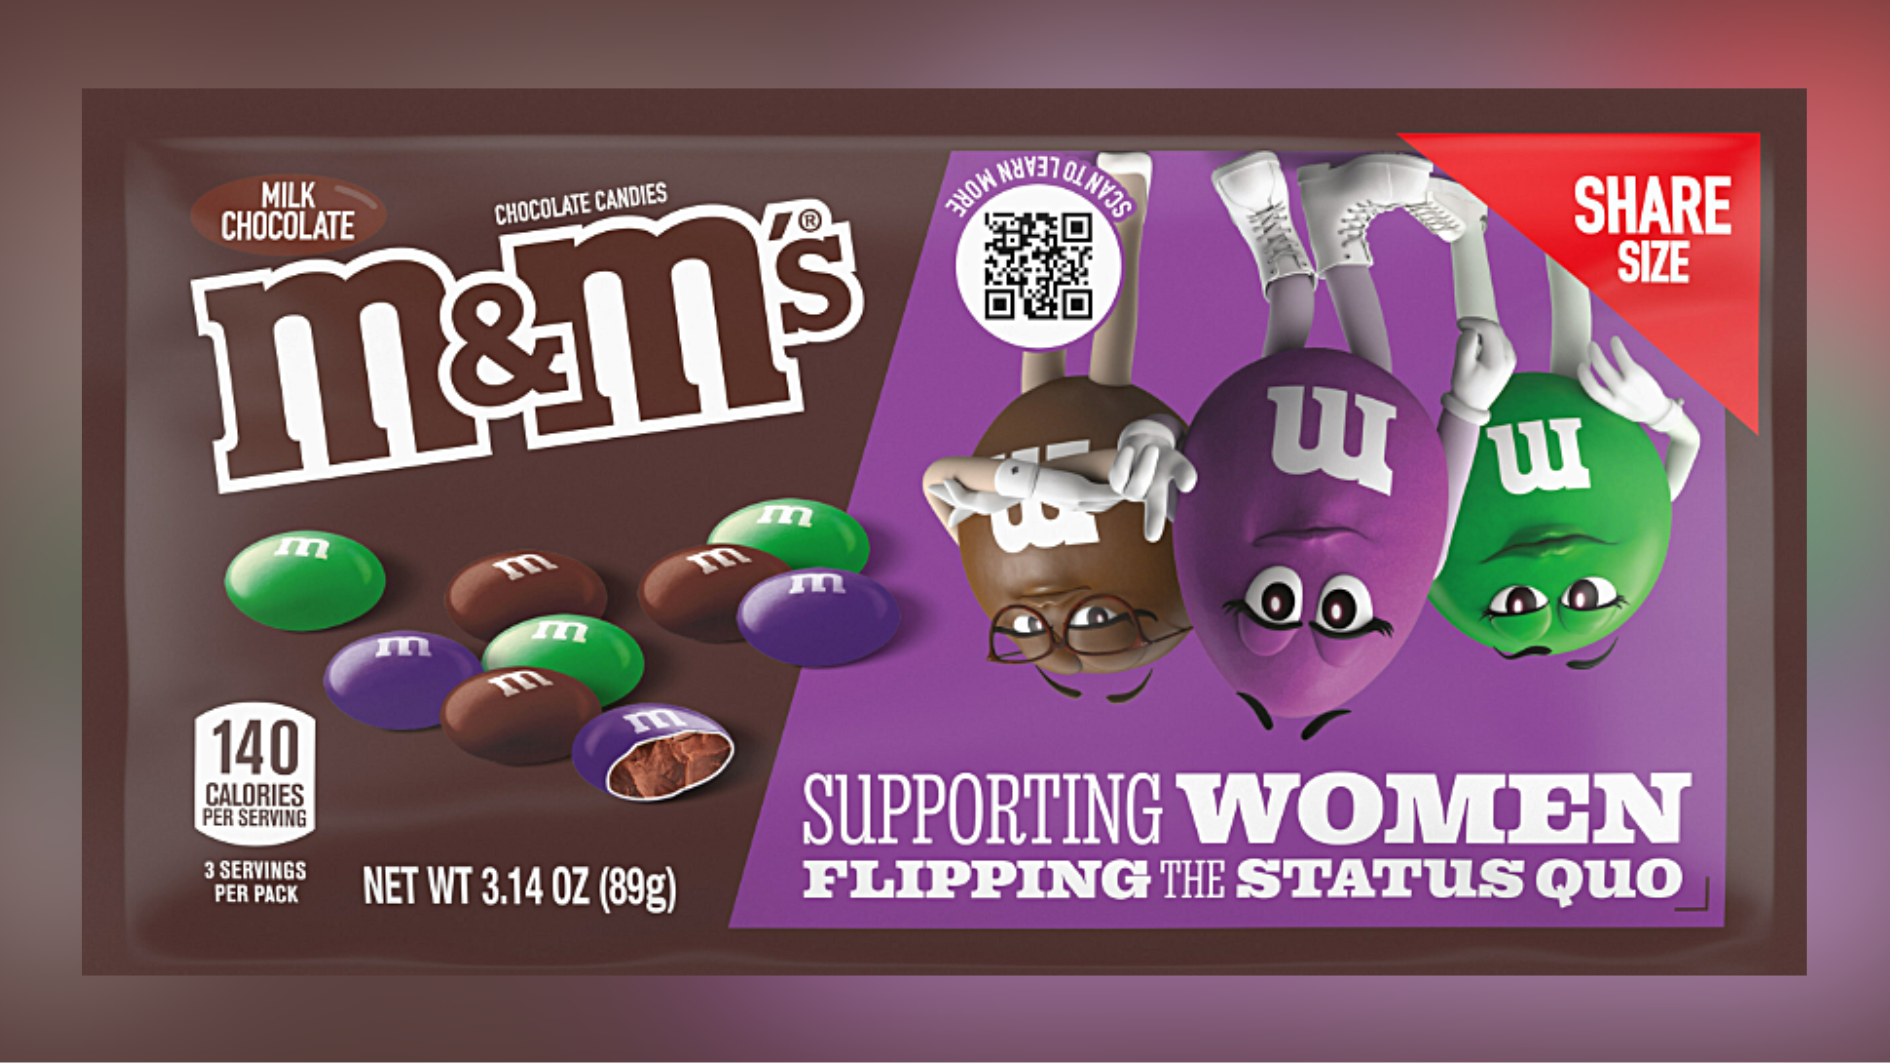 M&M's puts spokescandies on indefinite pause in wake of uproar